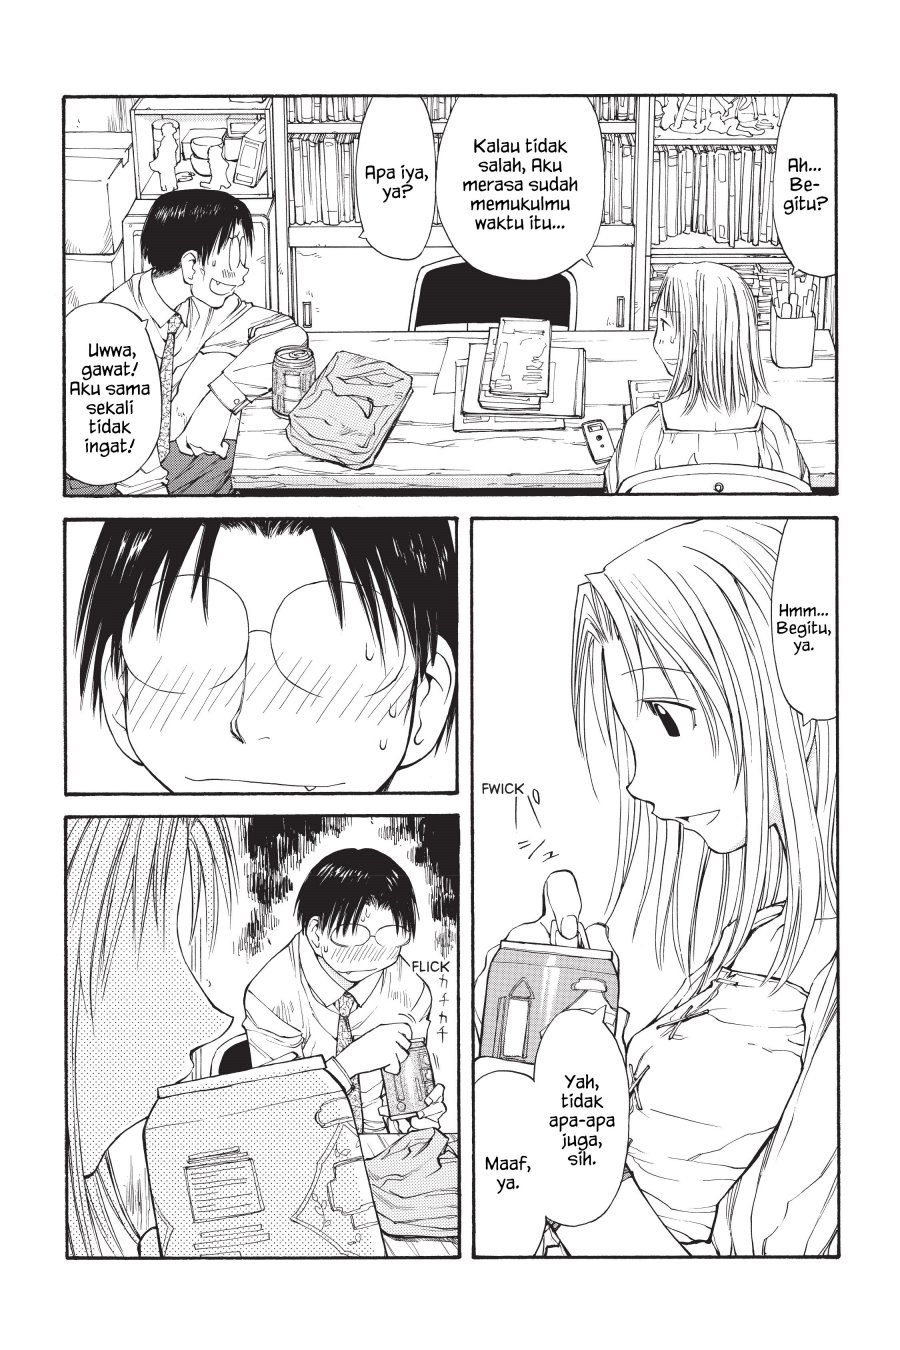 Genshiken – The Society for the Study of Modern Visual Culture Chapter 53 Image 15